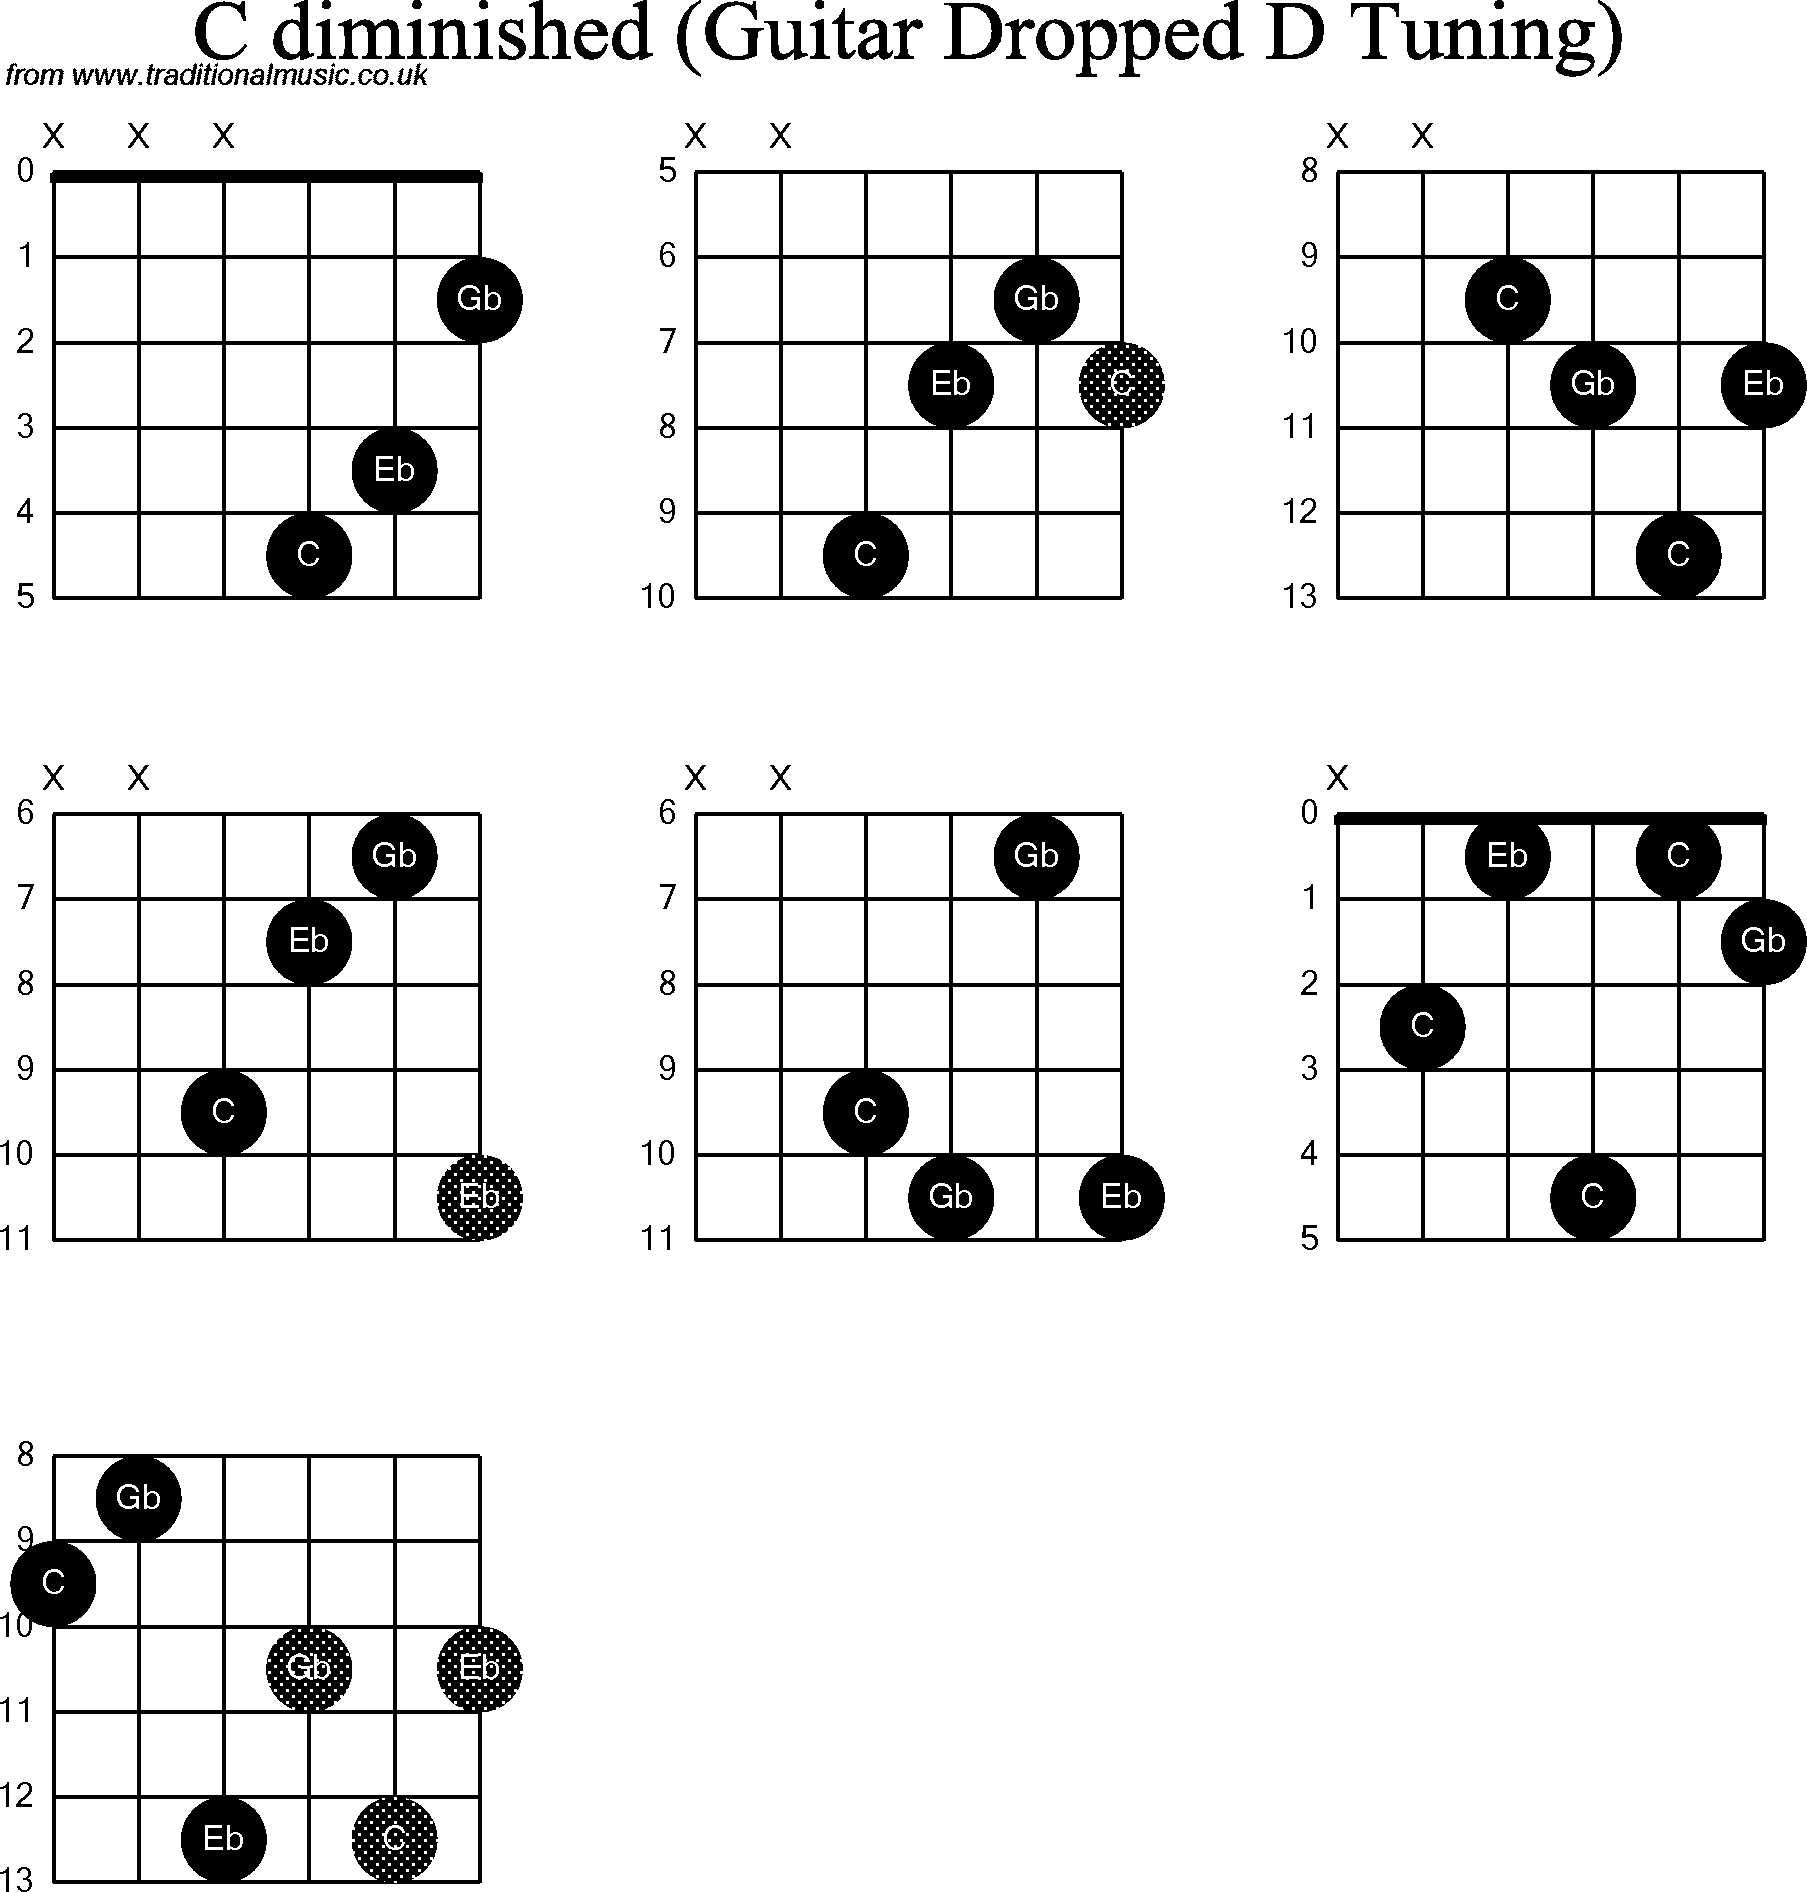 Chord diagrams for dropped D Guitar(DADGBE), C Diminished